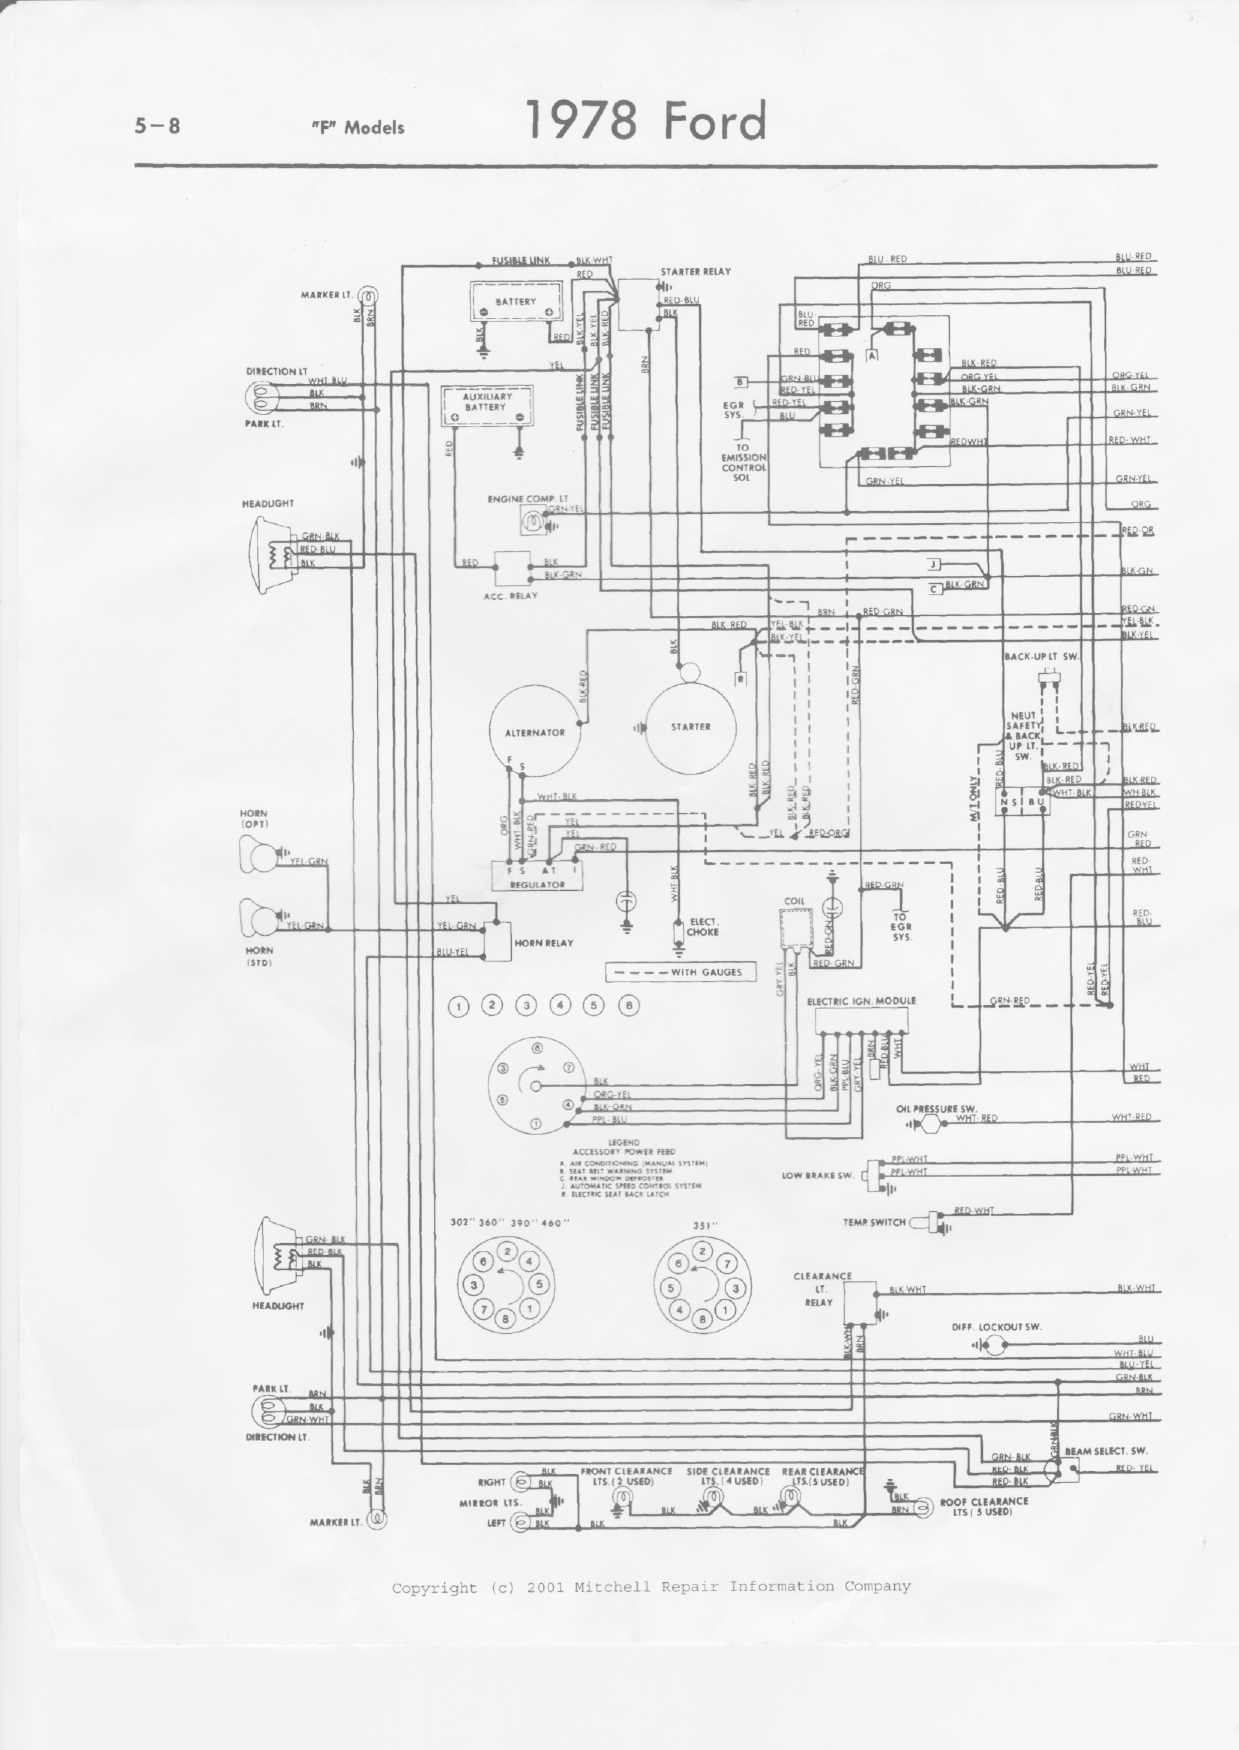 Tail Light Wiring Diagram Ford F150 from www.ford-trucks.com